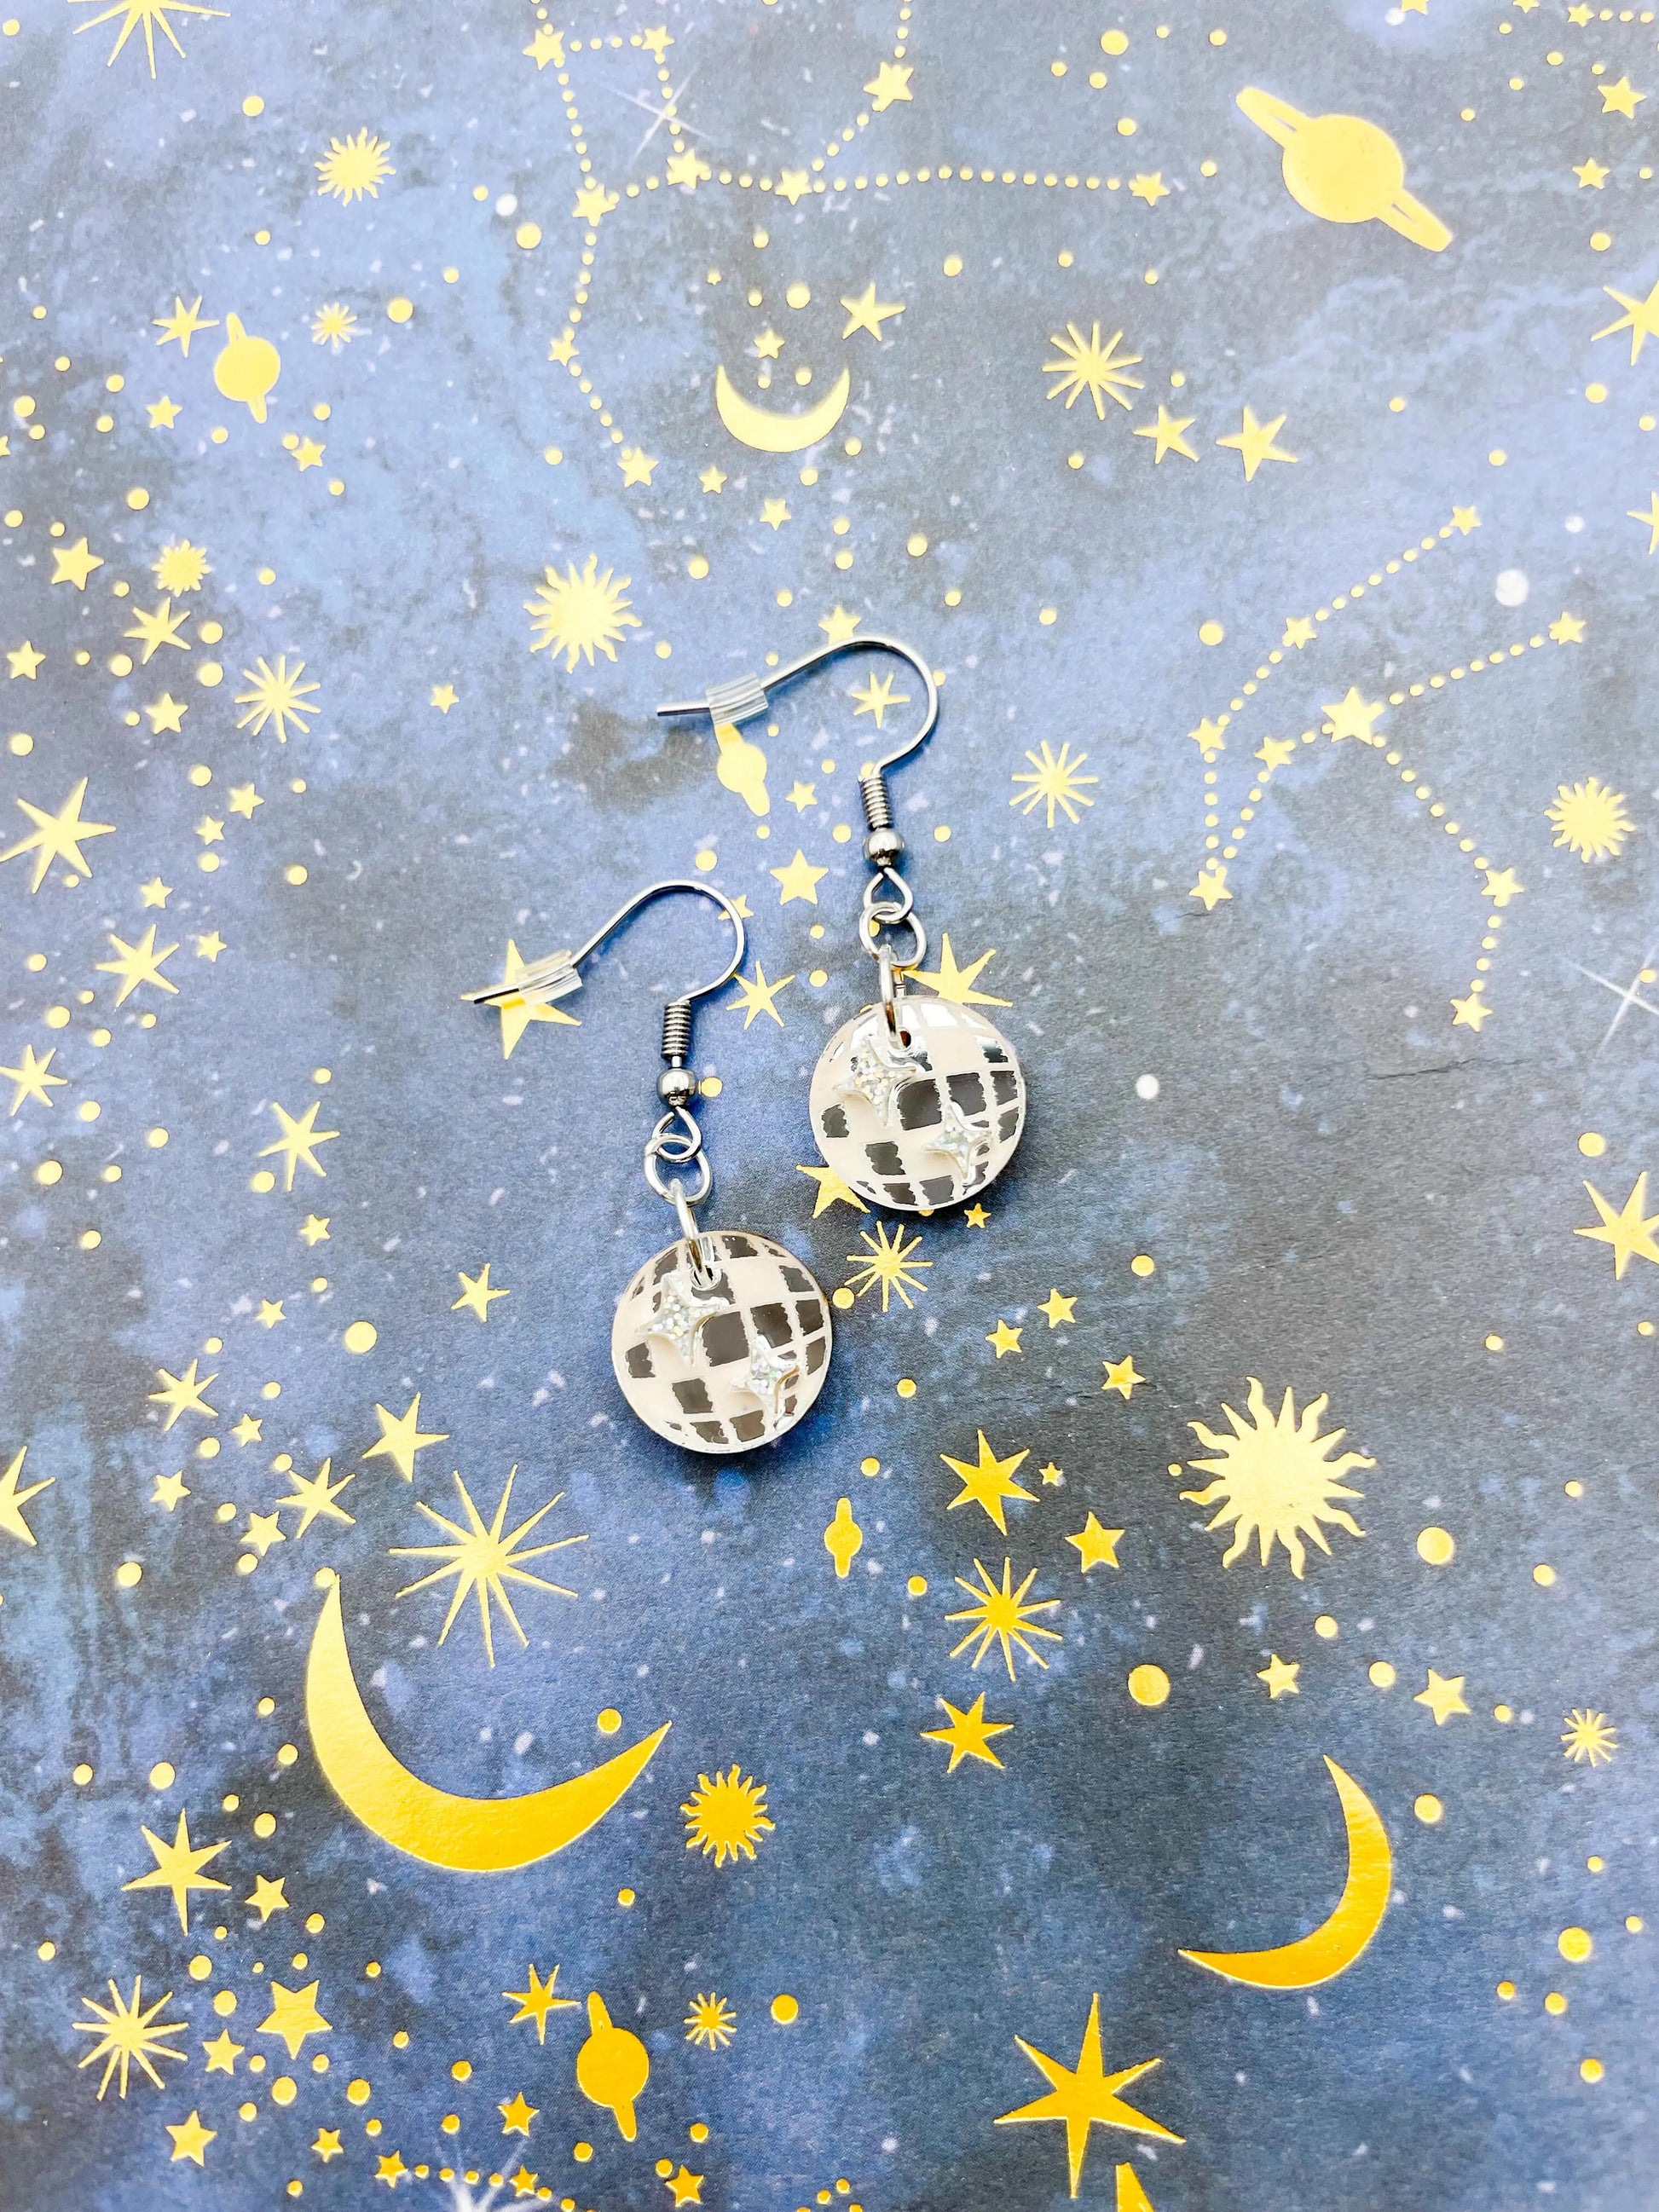 Small Silver Mirror and Holographic Silver Glitter Acrylic Disco Ball Dangle Earrings from Sapphire Frills